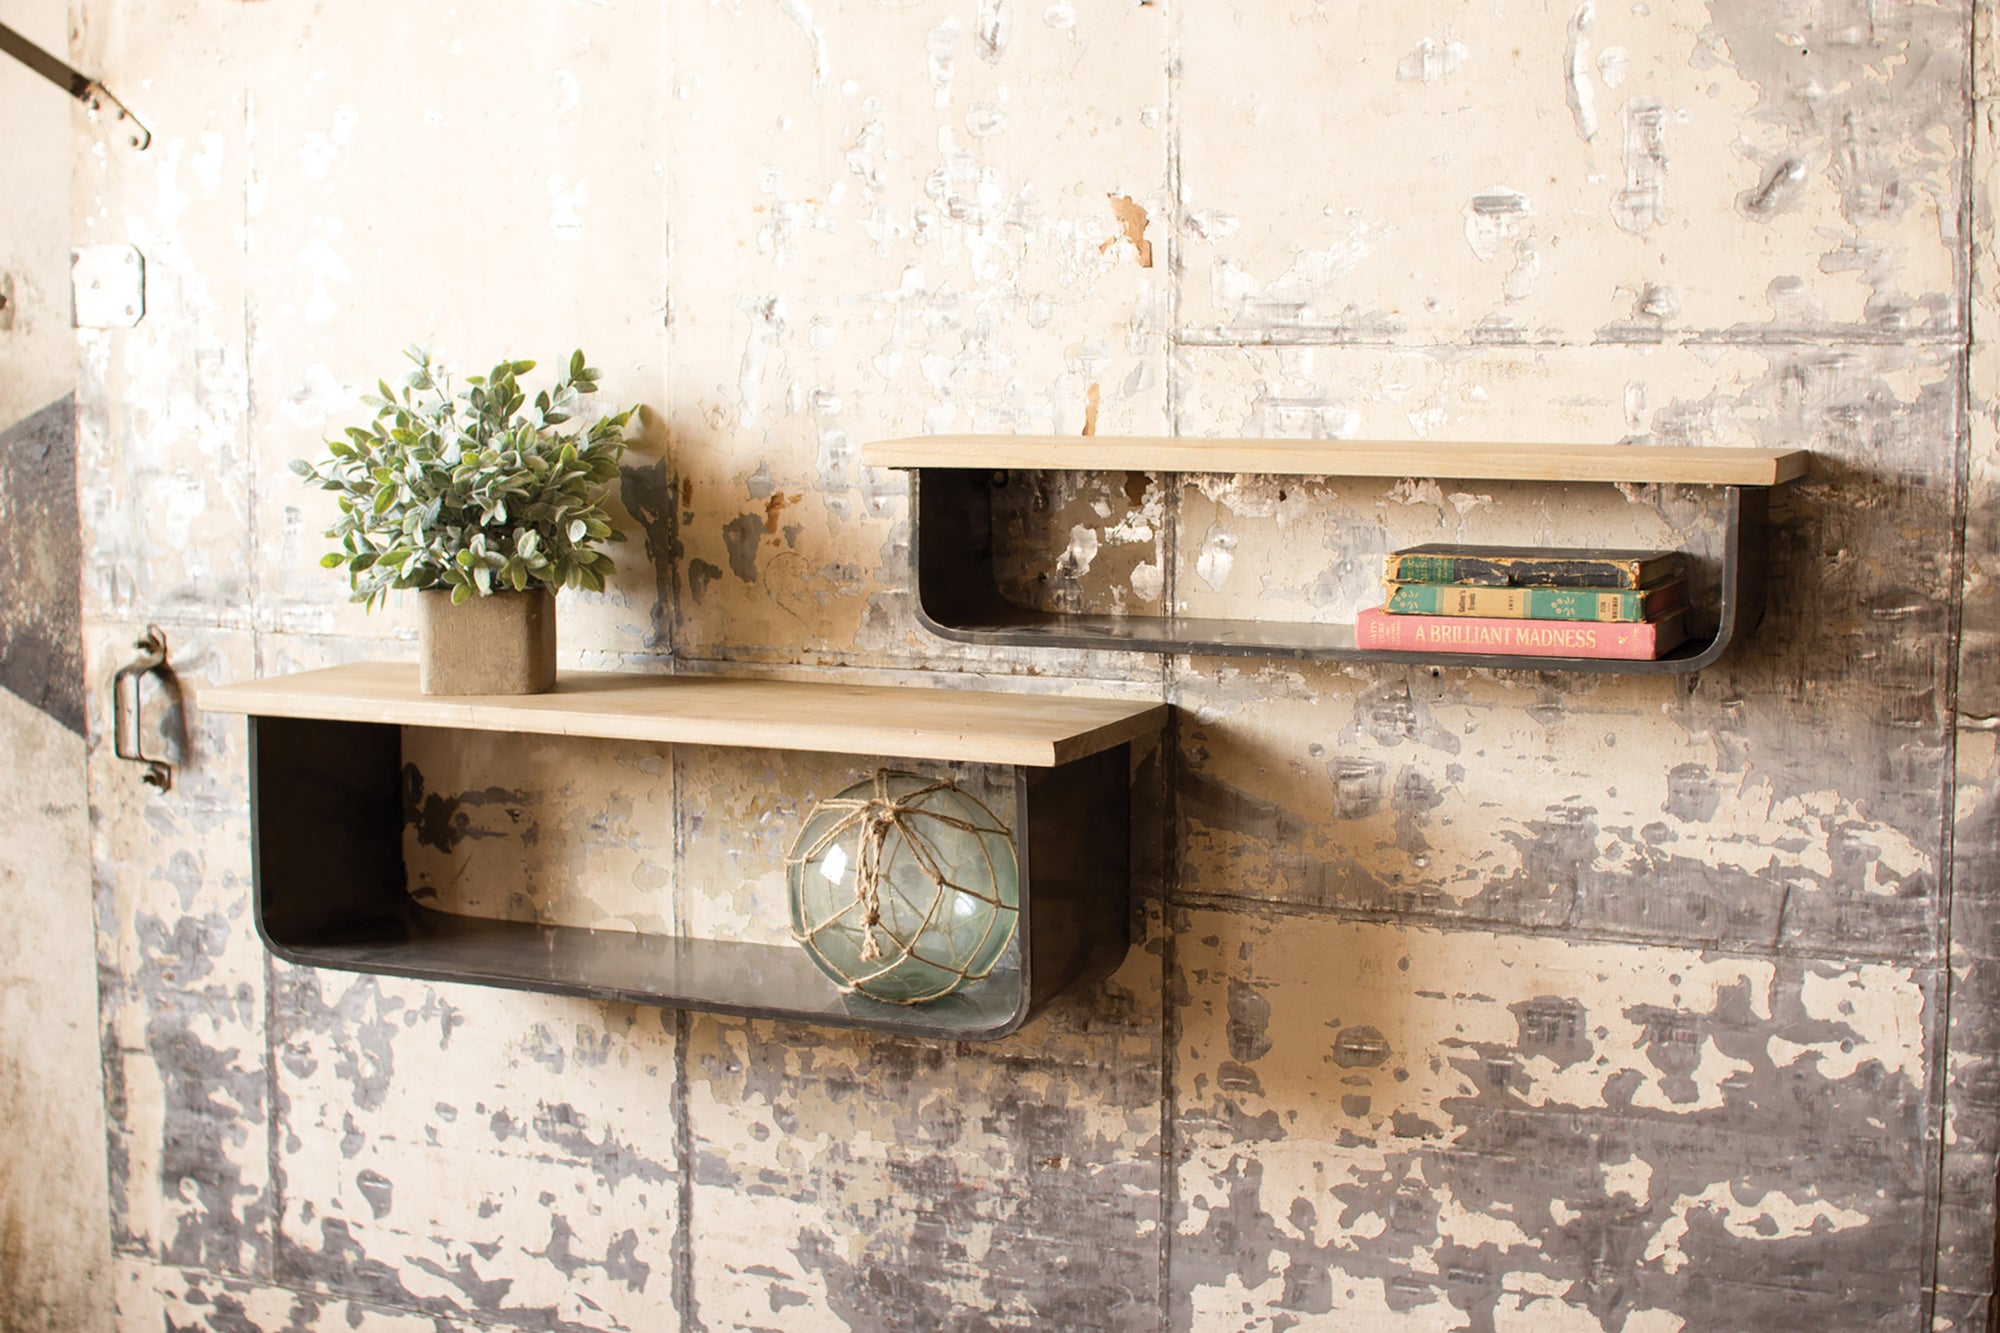 Set of Two Industrial Modern Metal and Wood Wall Shelves